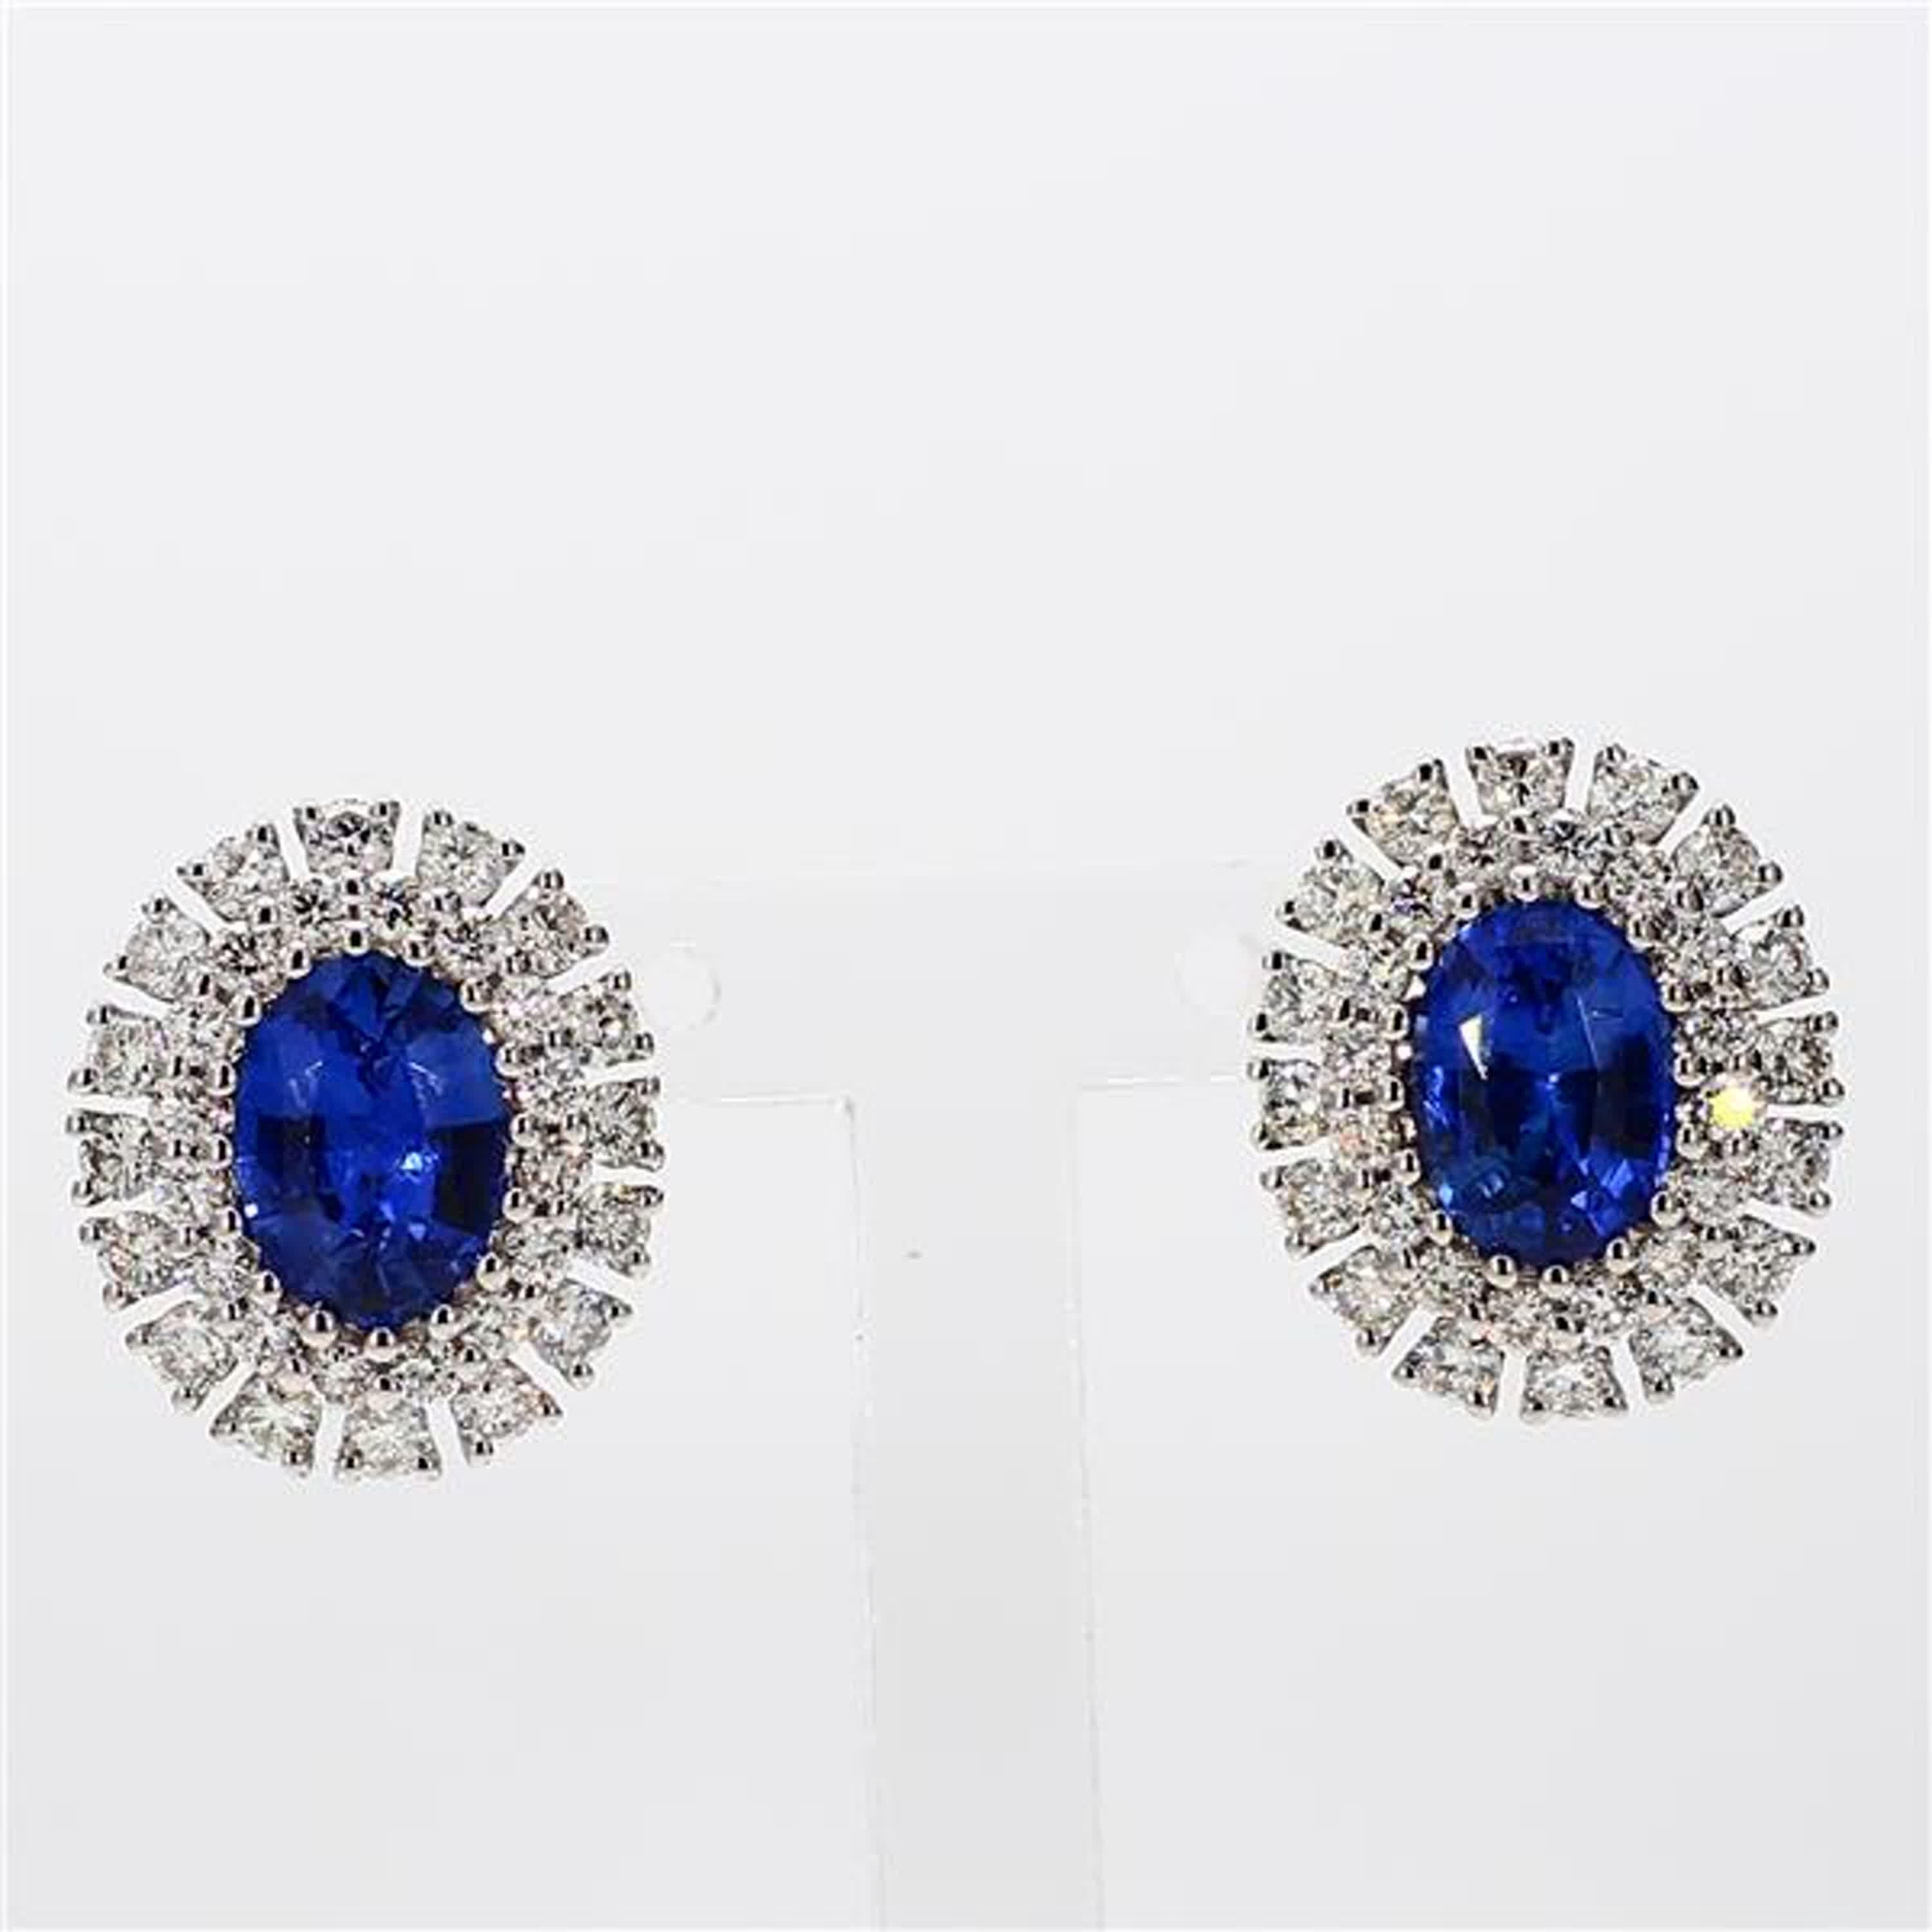 RareGemWorld's classic sapphire earrings. Mounted in a beautiful 18K White Gold setting with natural oval cut blue sapphires. The sapphires are surrounded by natural round white diamond melee. These earrings are guaranteed to impress and enhance